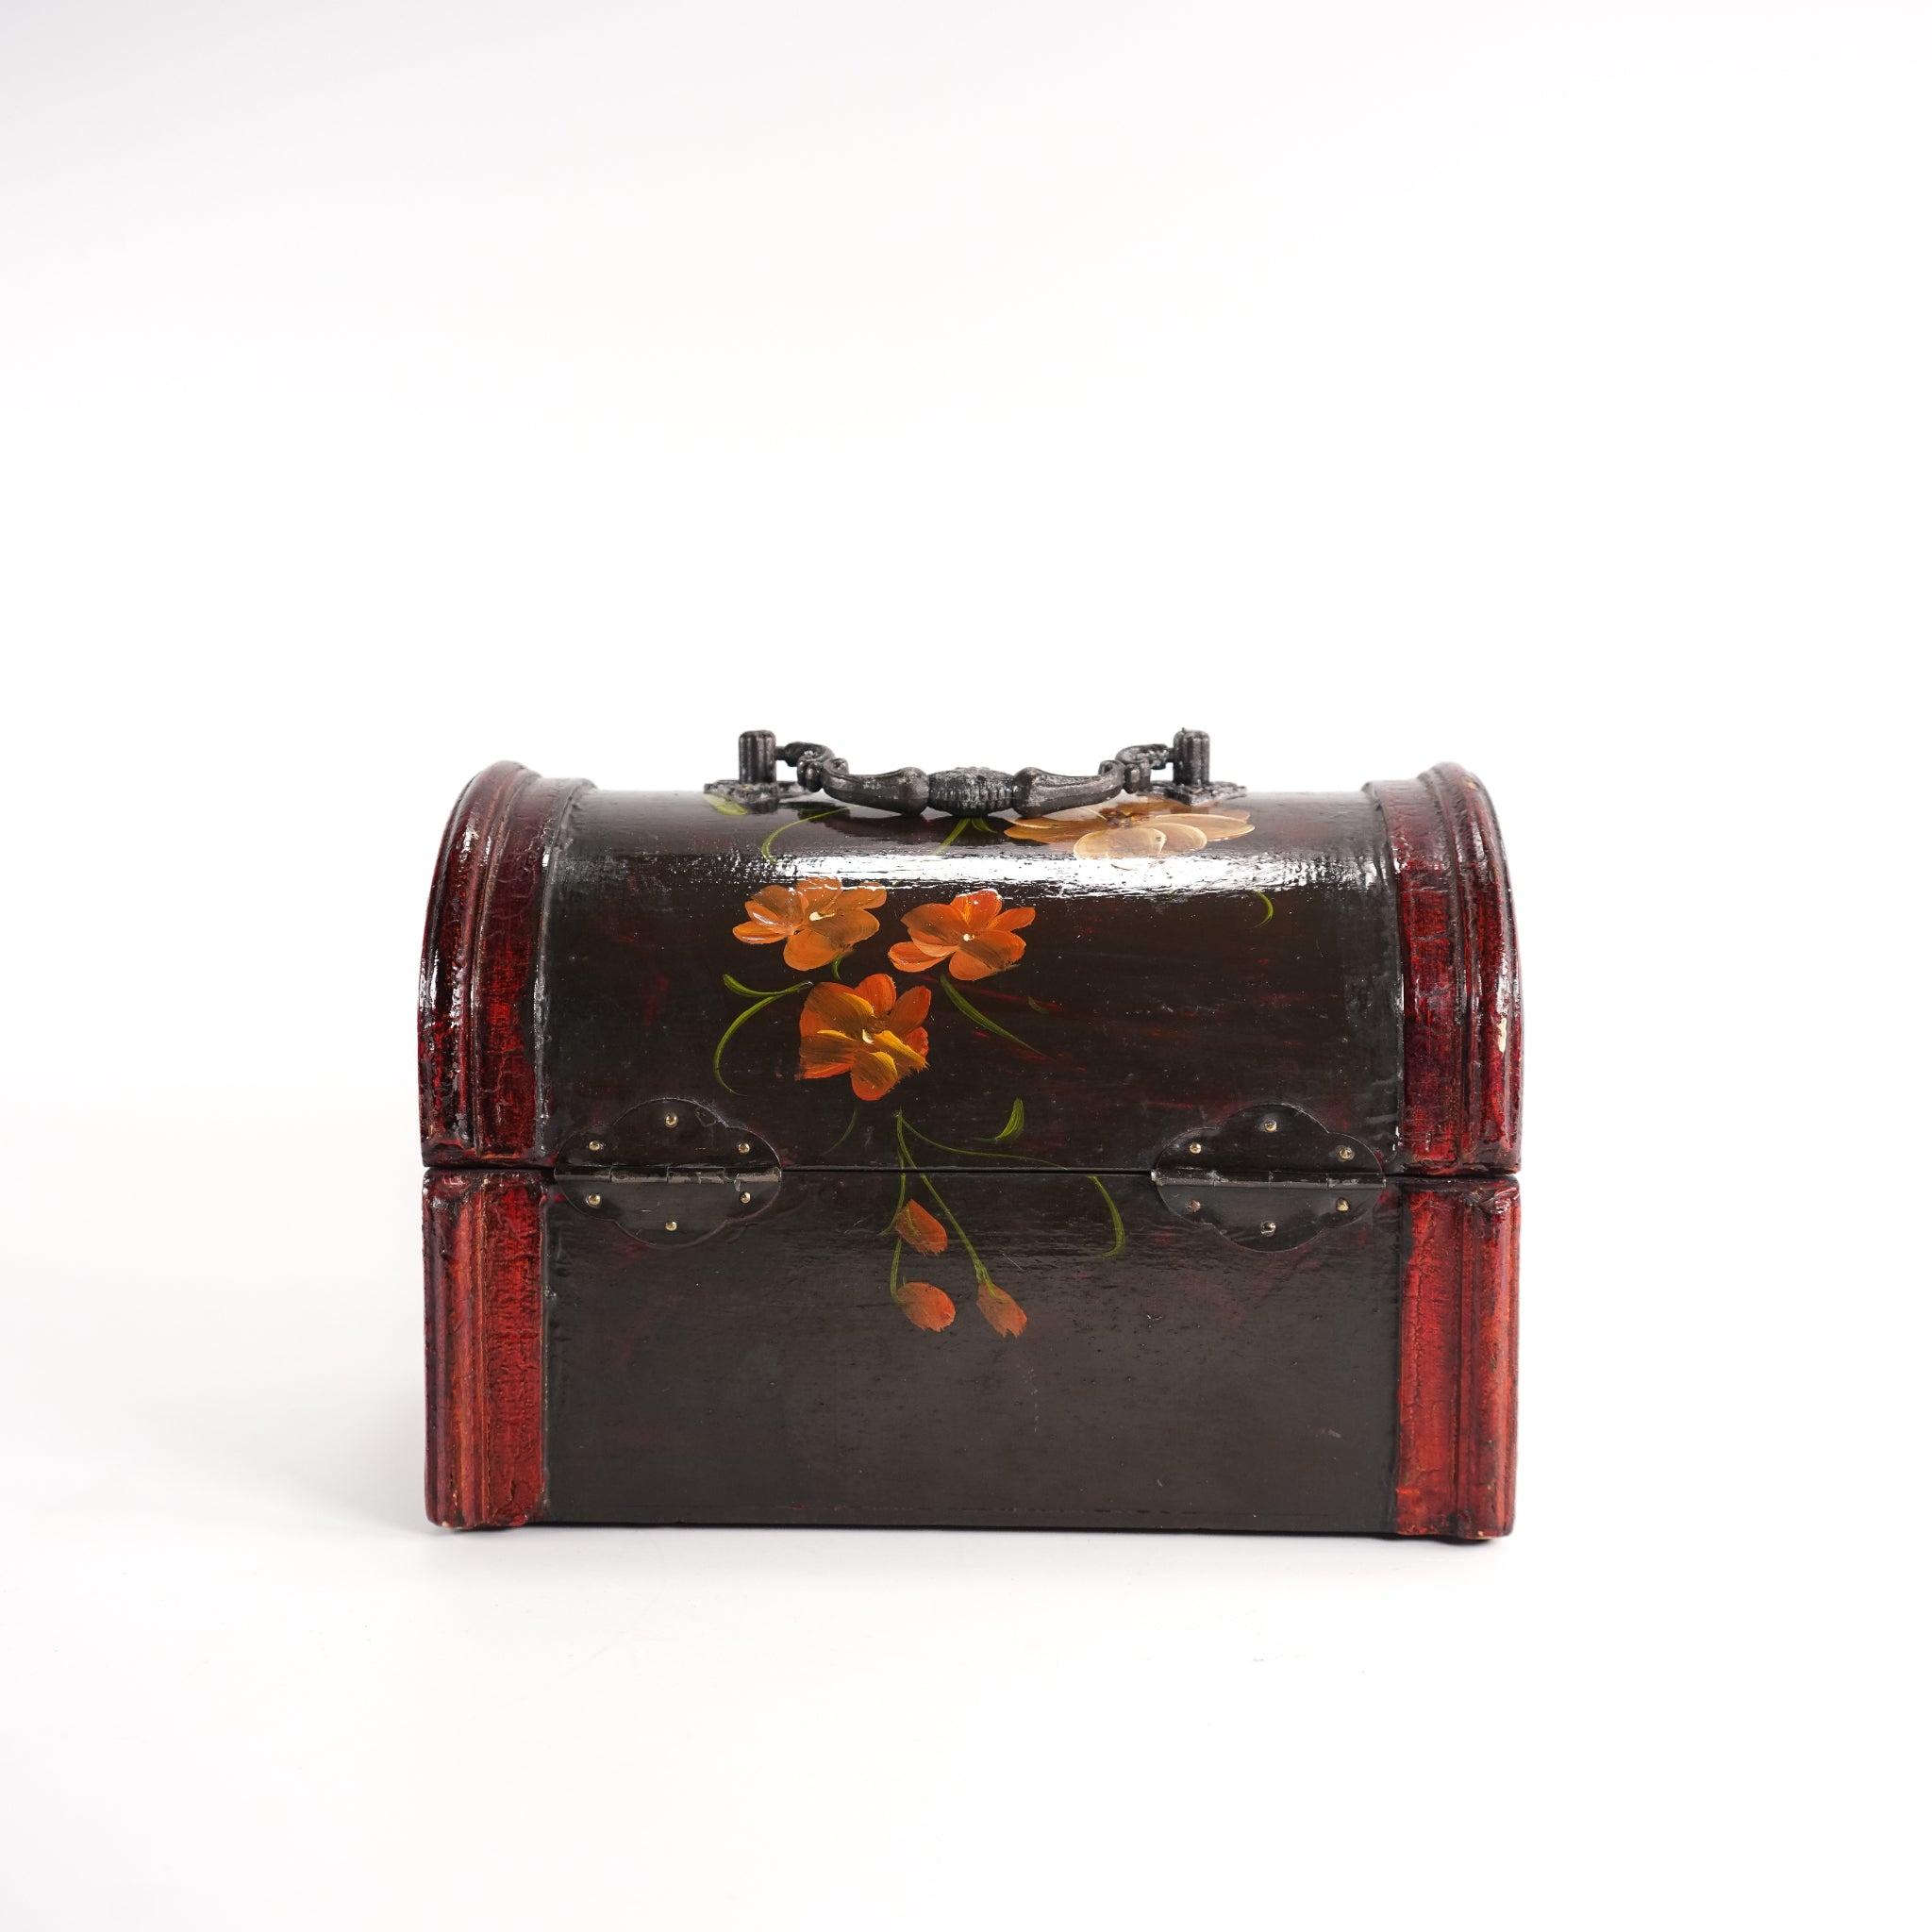 Painted Floral Box - Sirdab - Unknown